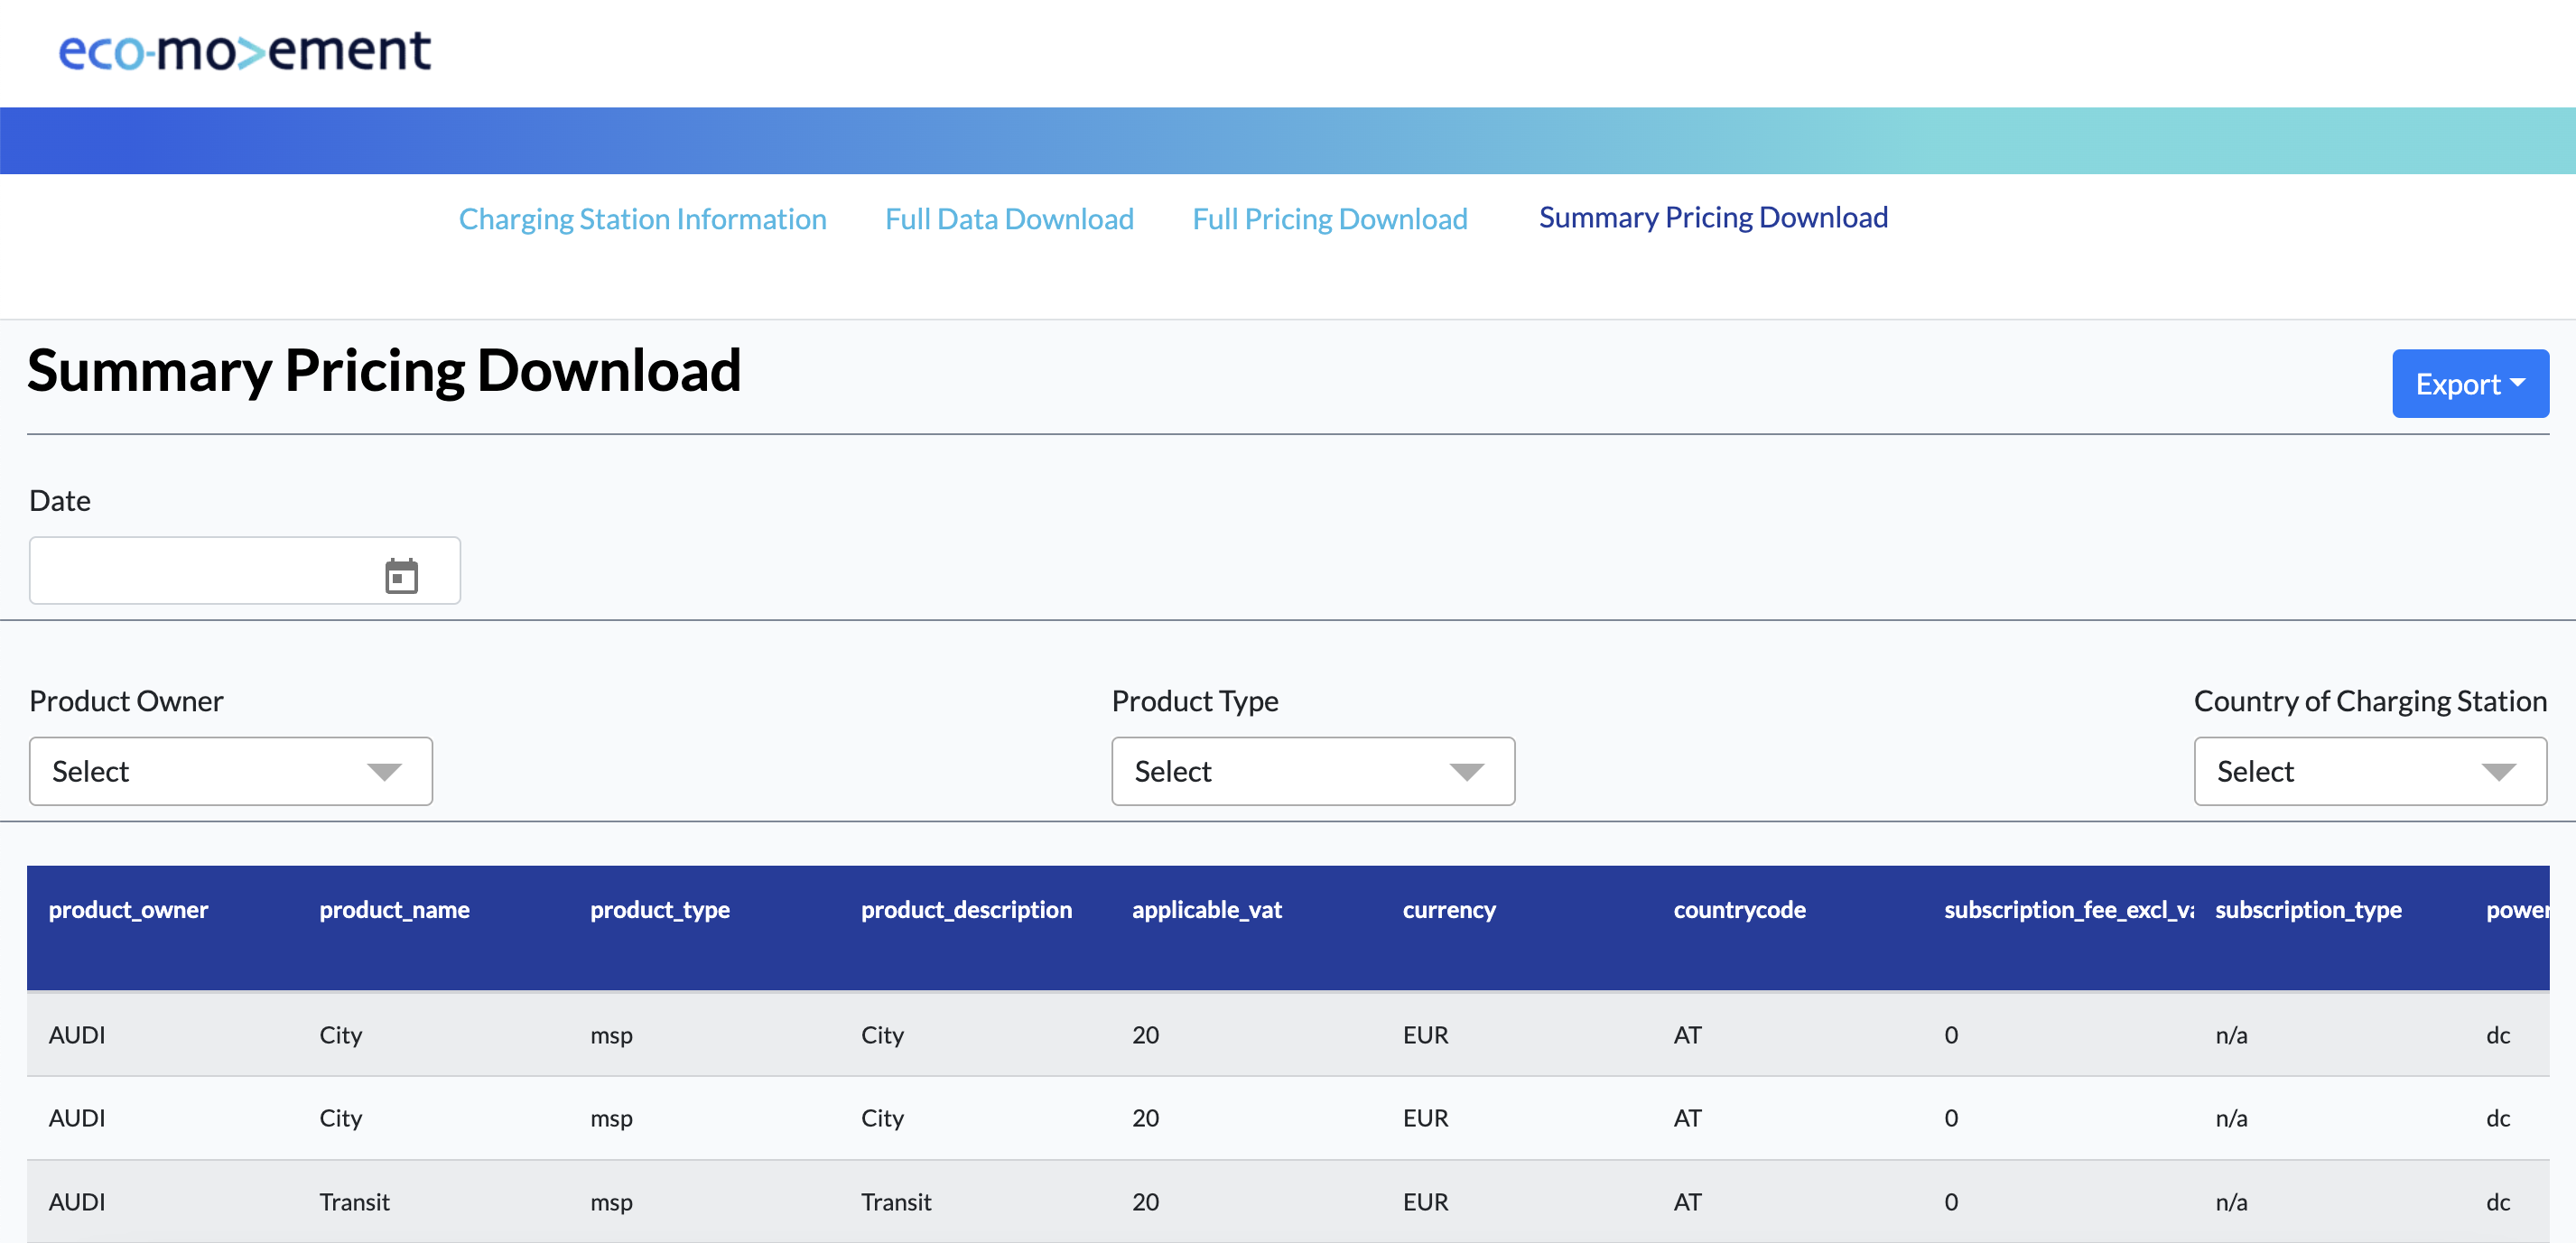 The Summary Pricing Download dashboard